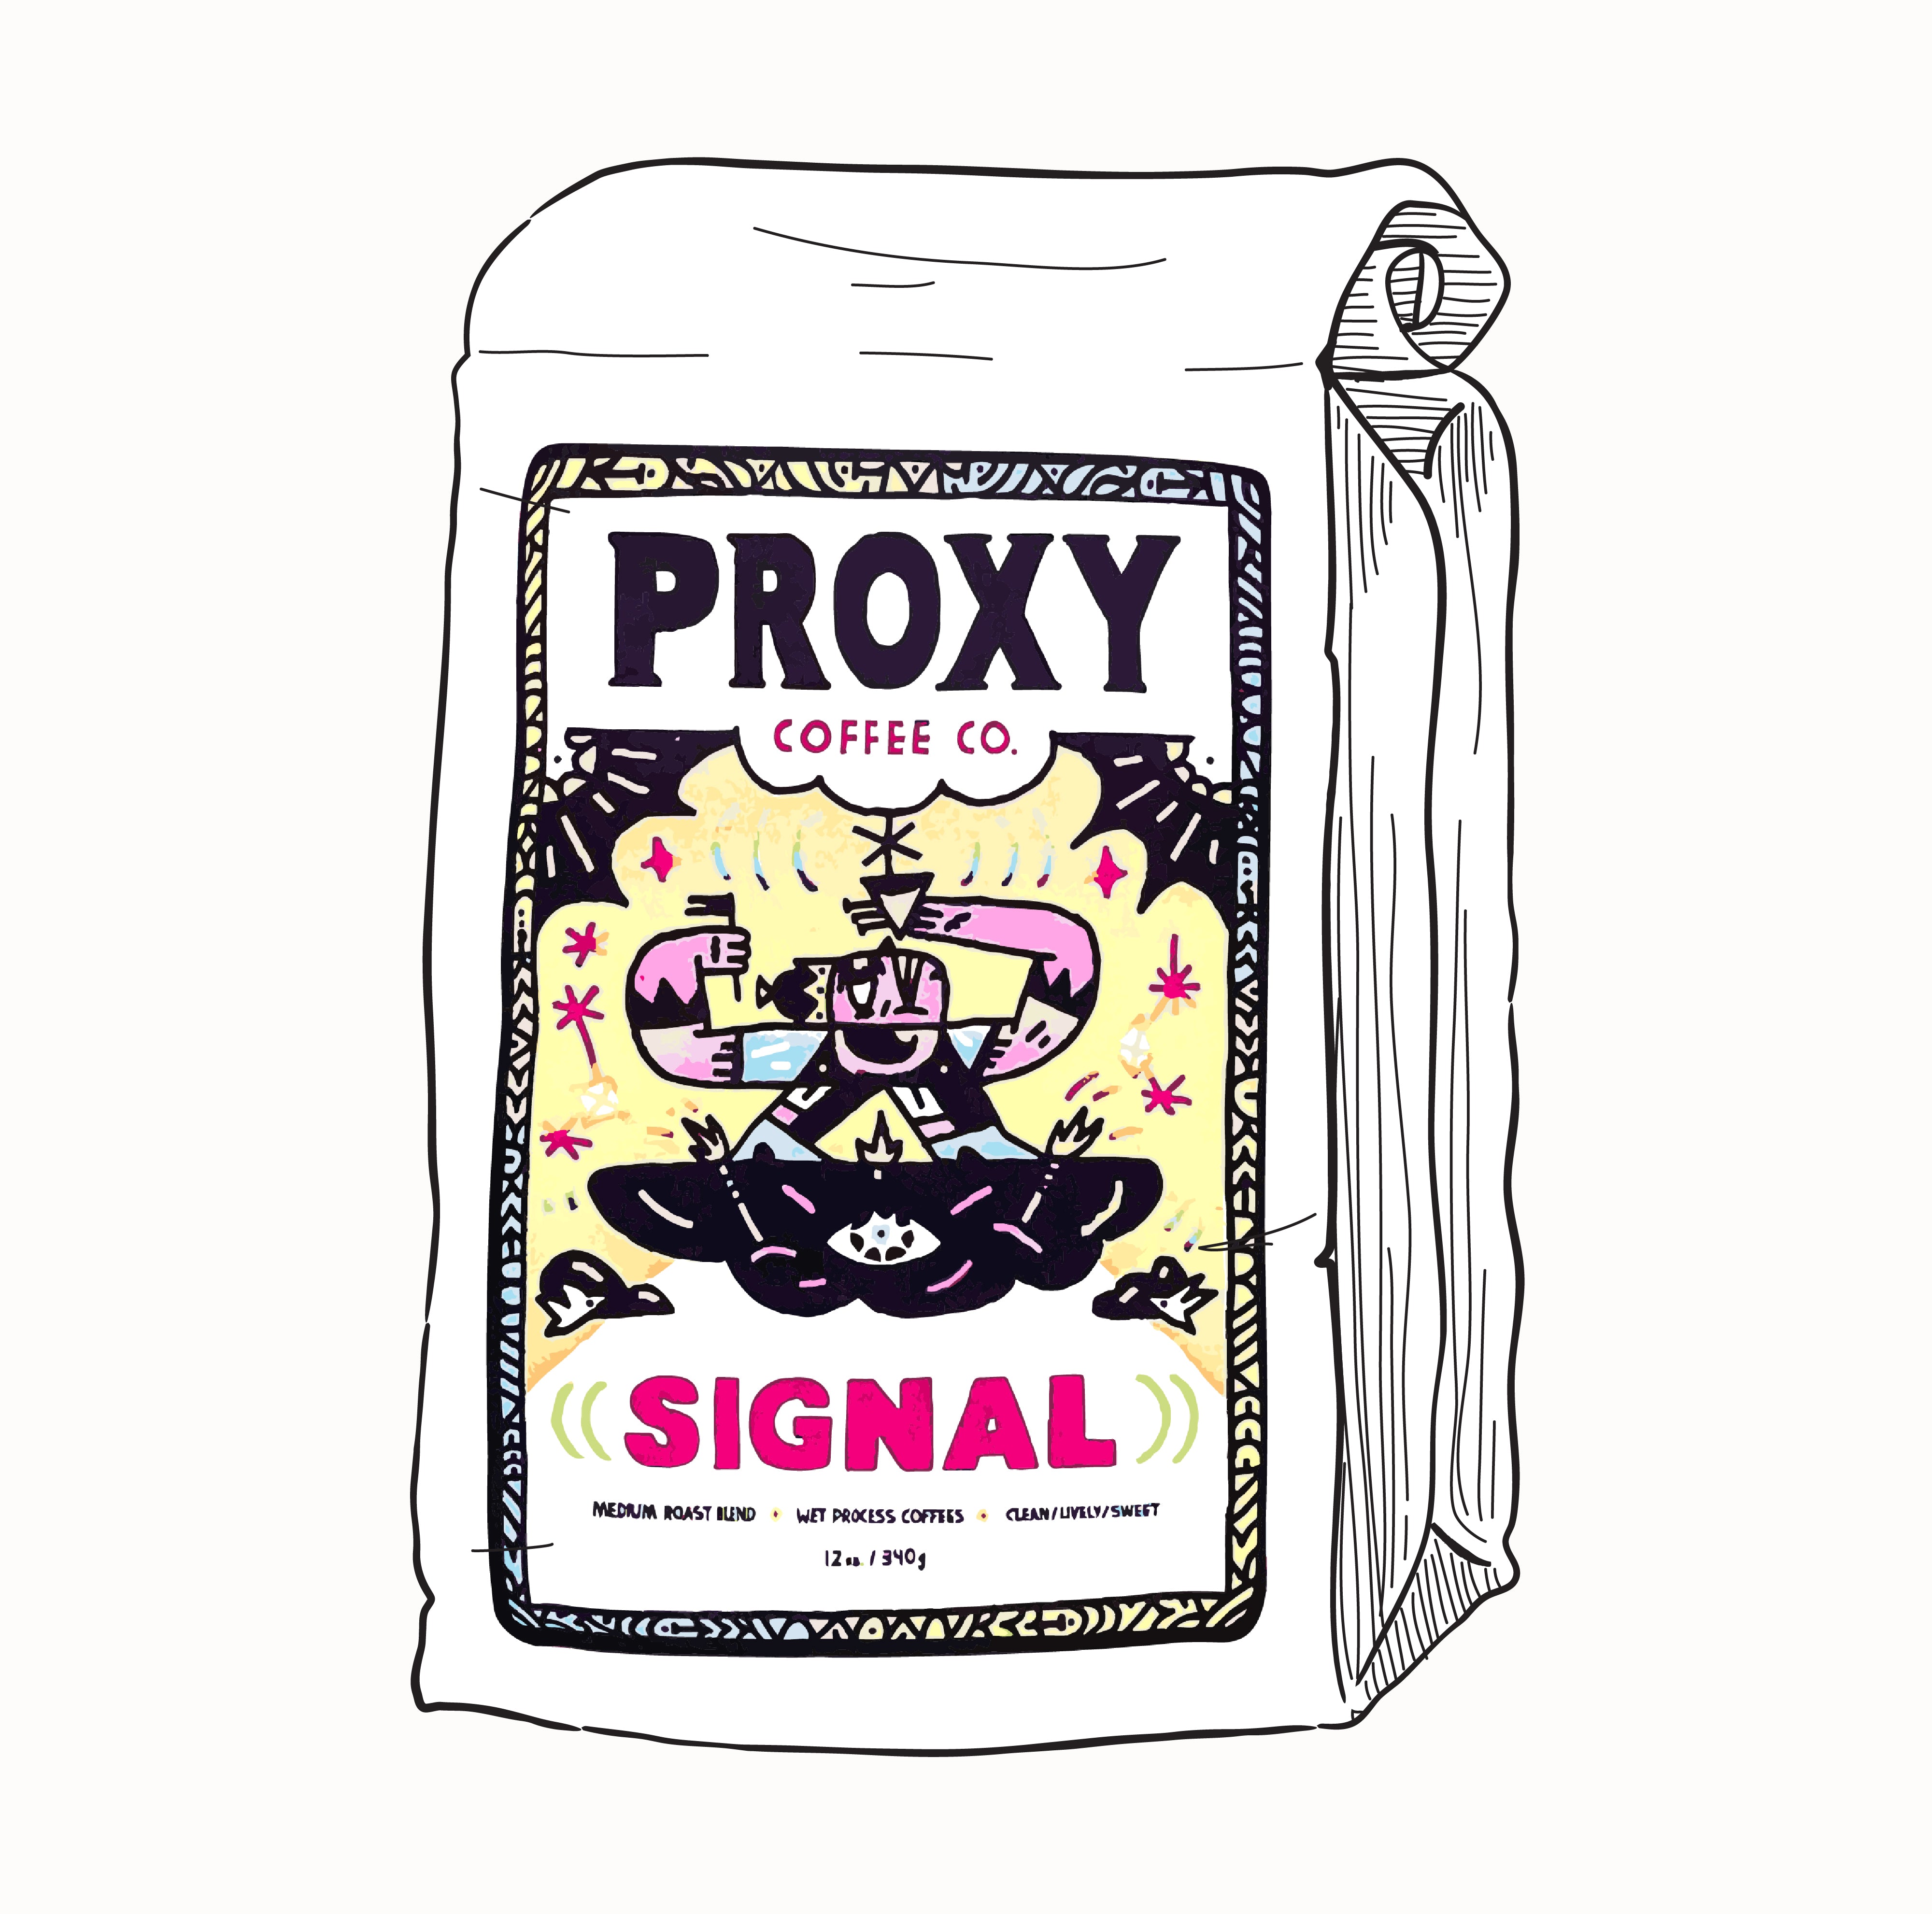 2D drawing of a bag of coffee with Proxy Coffee Co.'s Signal Blend label. Text on the bag of coffee reads: Proxy Coffee Co. Signal. Medium roast blend. Wet process coffees. Clean/Lively/Sweet.